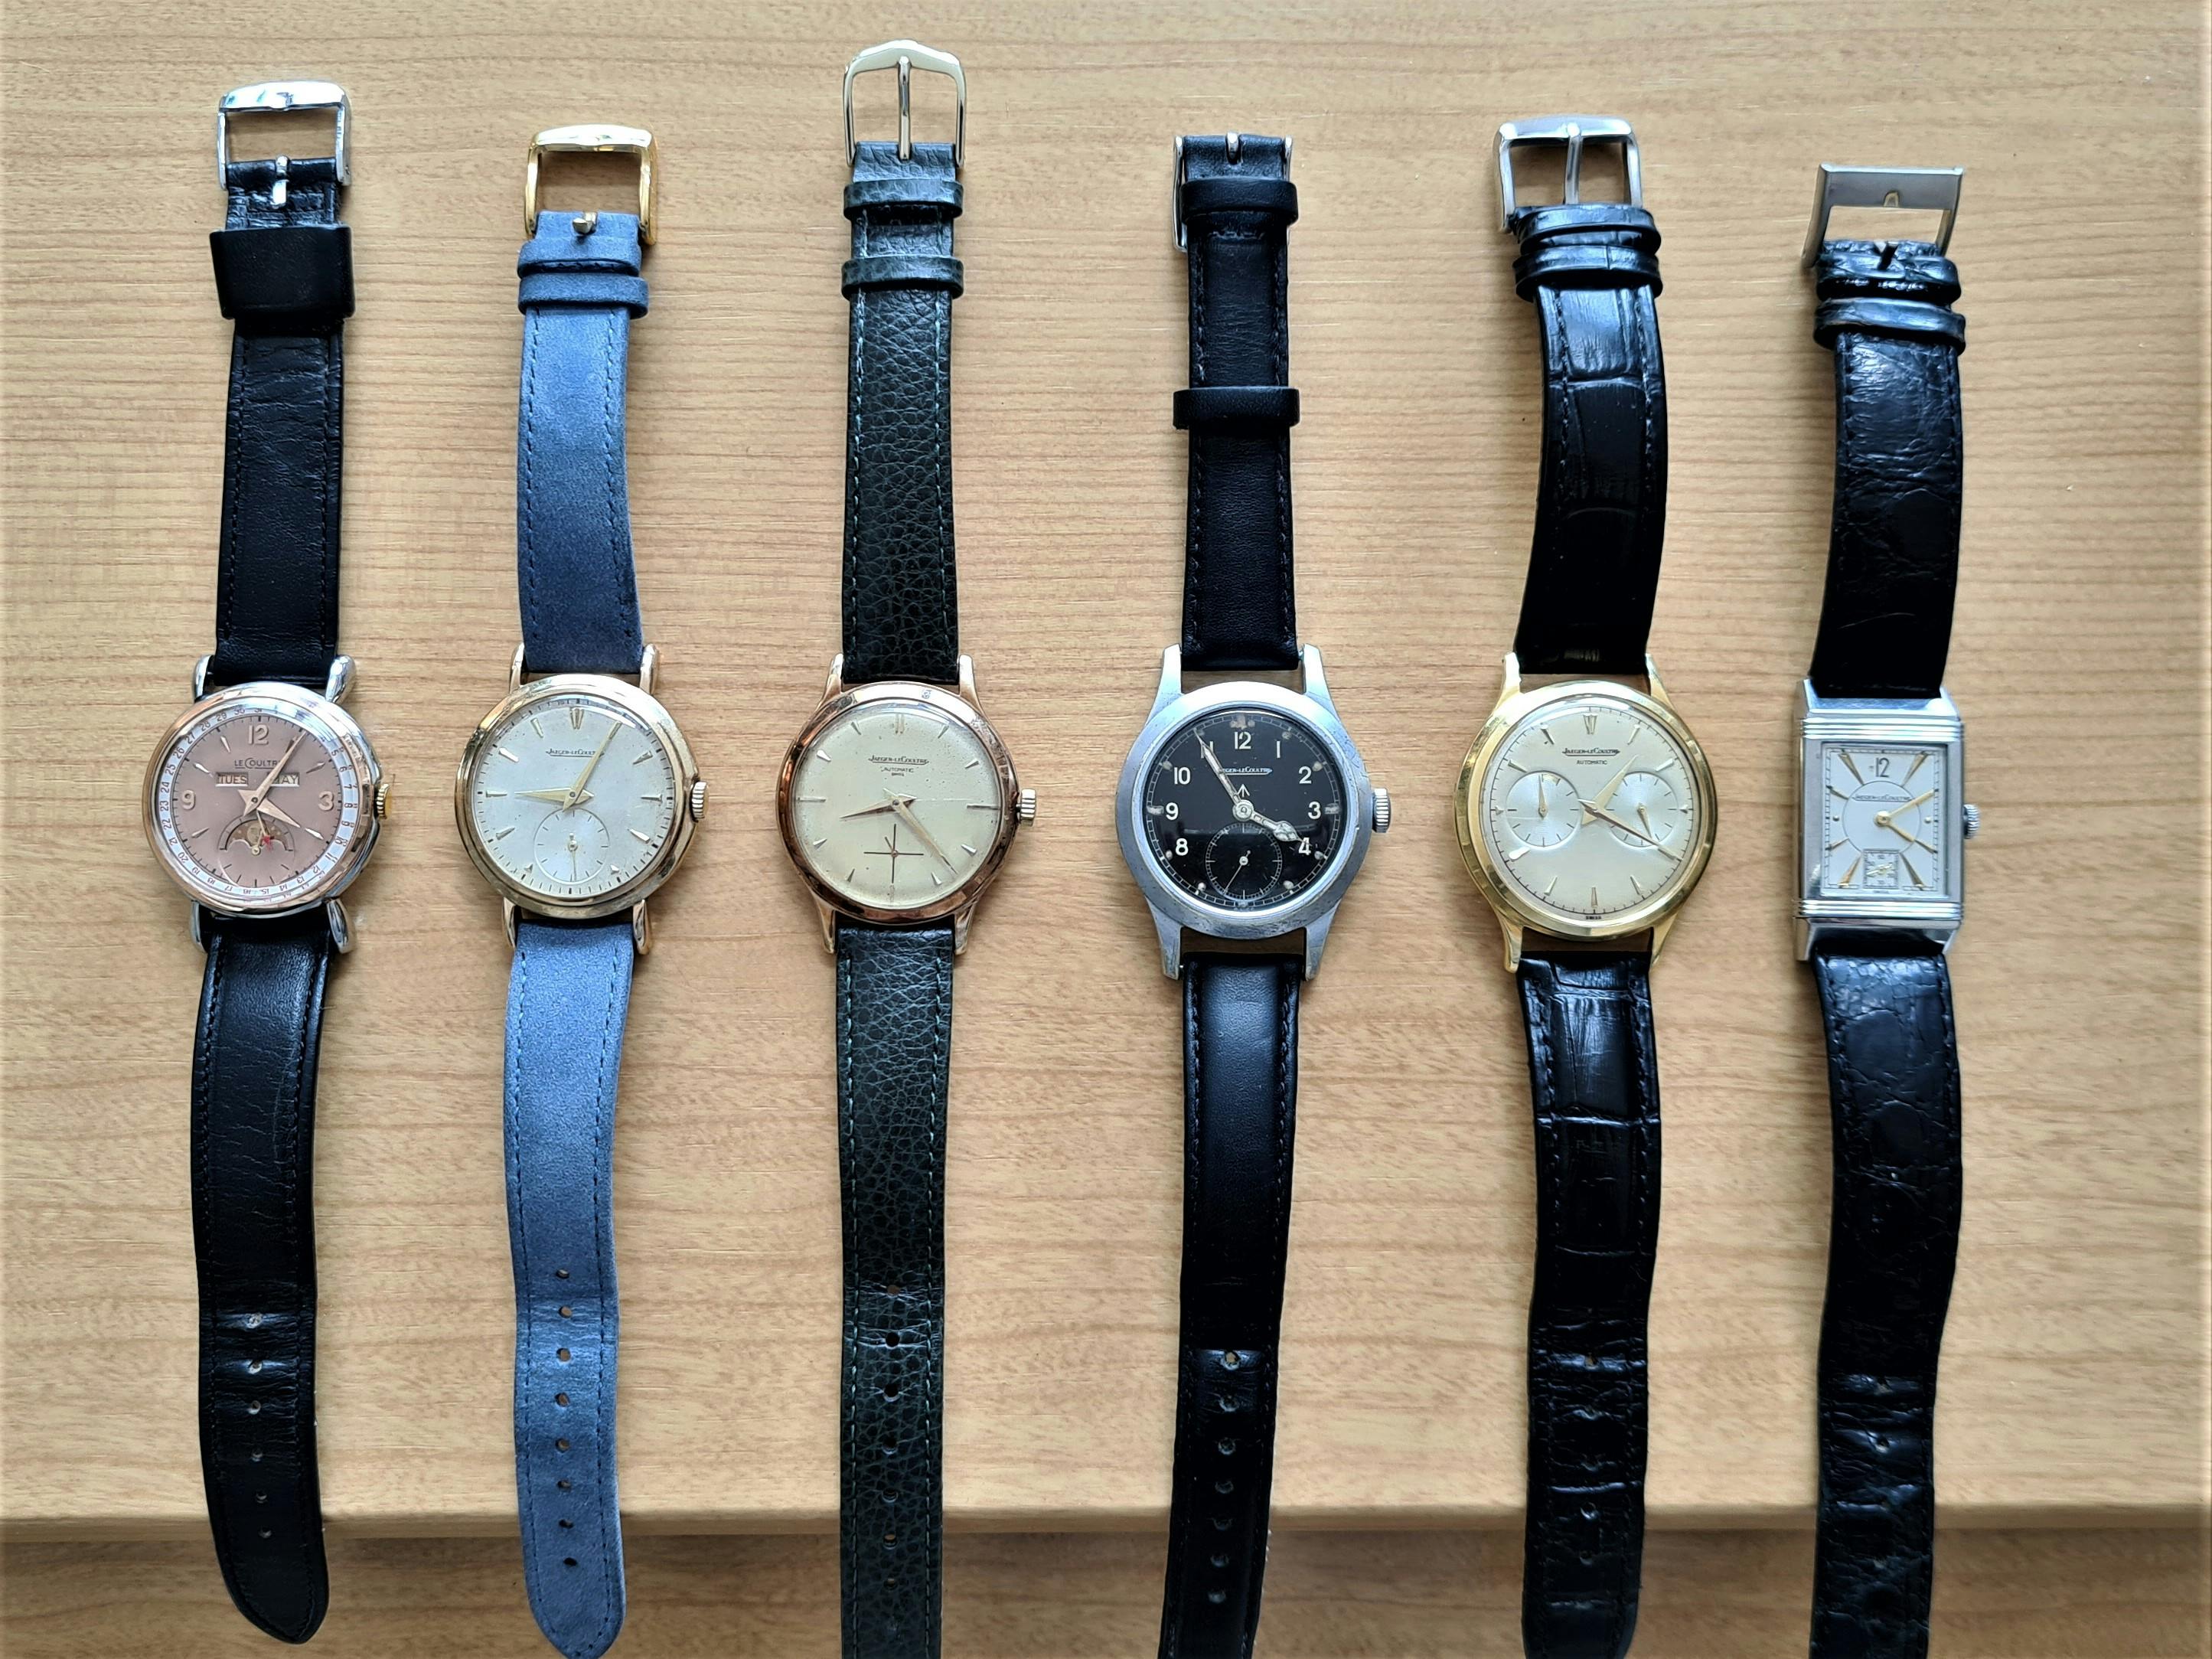 The watches that started the Author's collection. All over 60 years old, and all made by Swiss brand Jaeger LeCoultre.